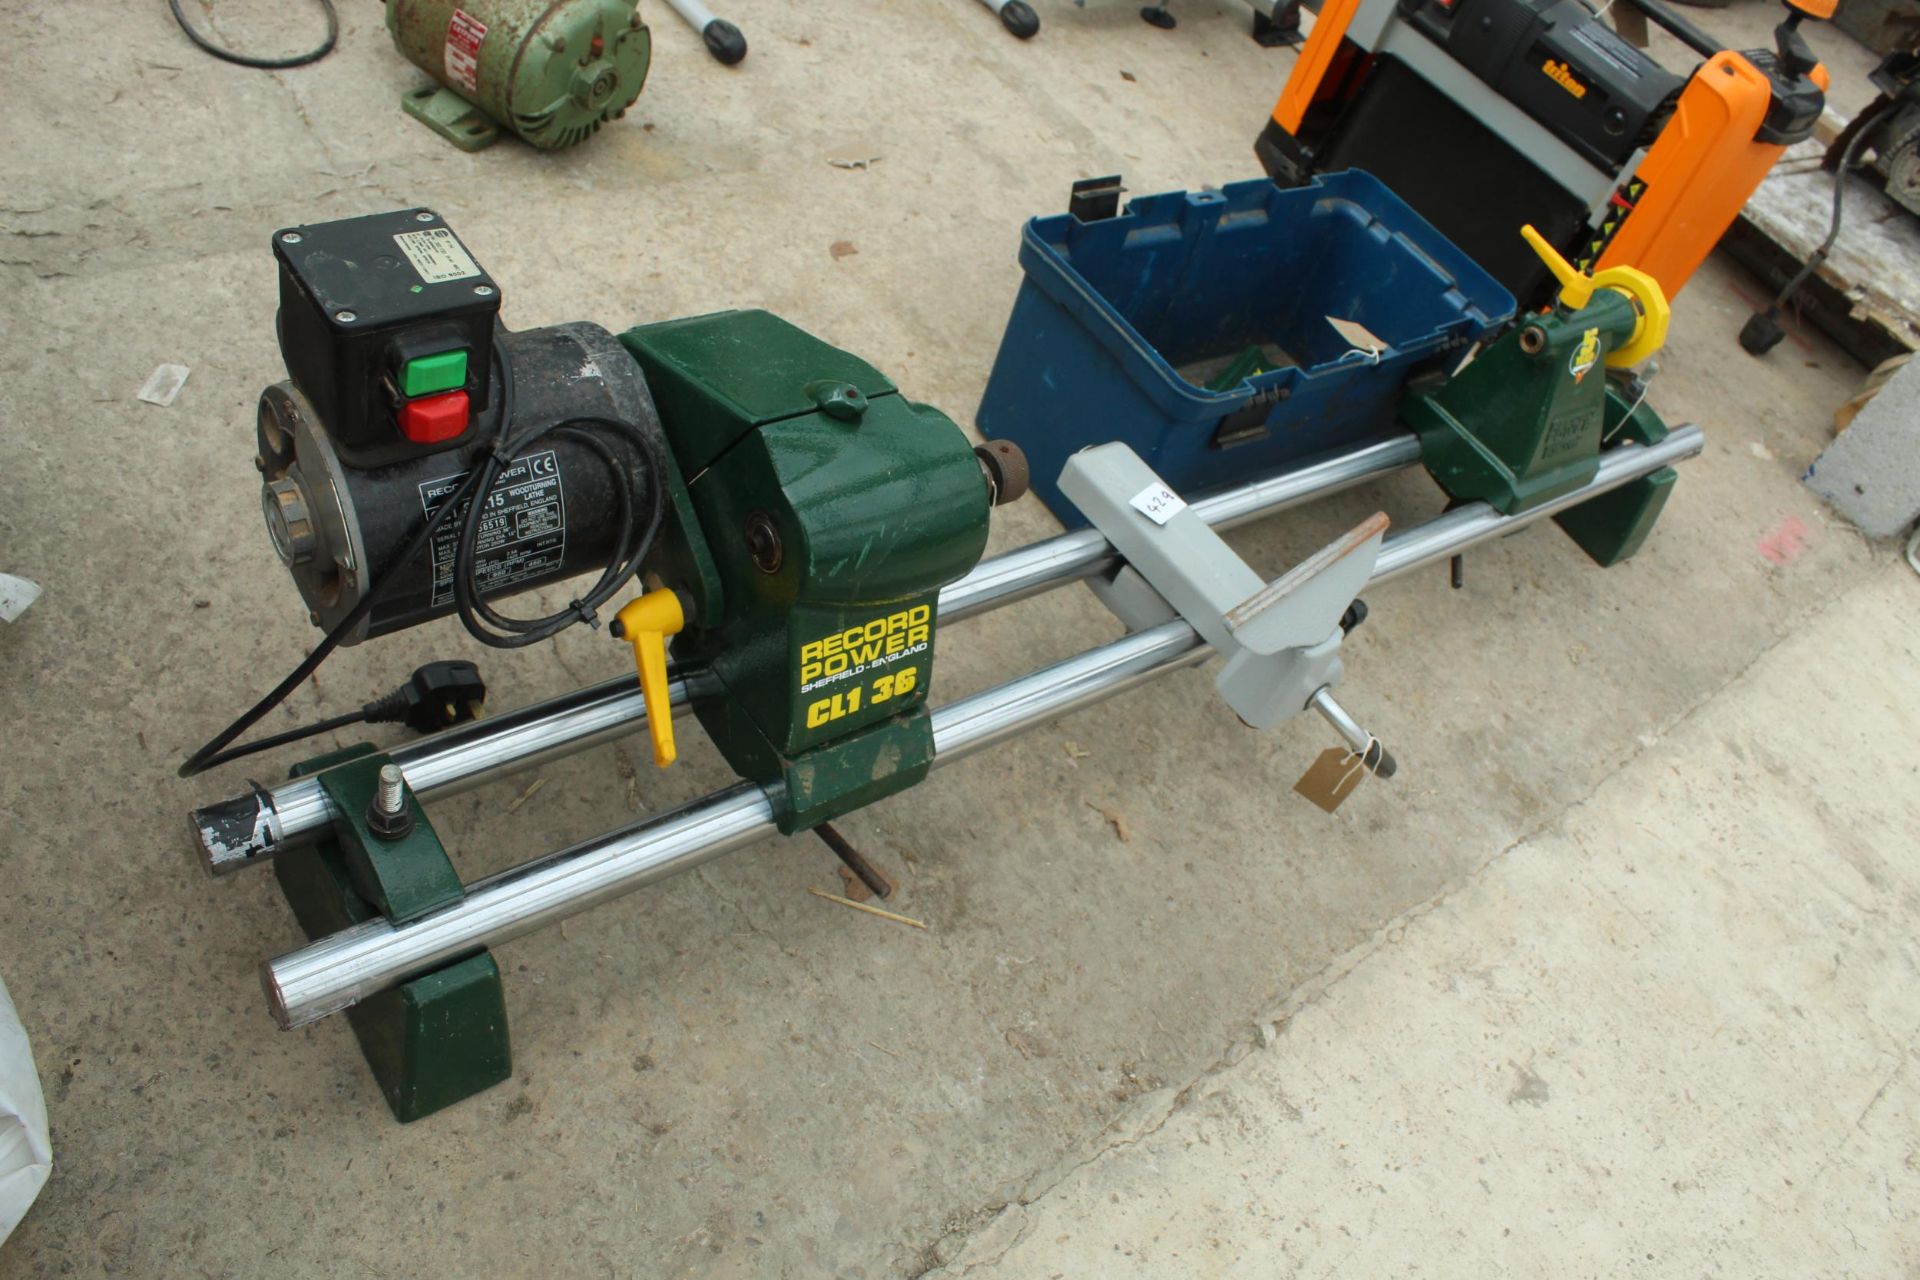 RECORD POWER CL1 36" WITH TOOL POST, STOCK ETC (4 ITEMS) IN WORKING ORDER NO VAT - Image 2 of 3